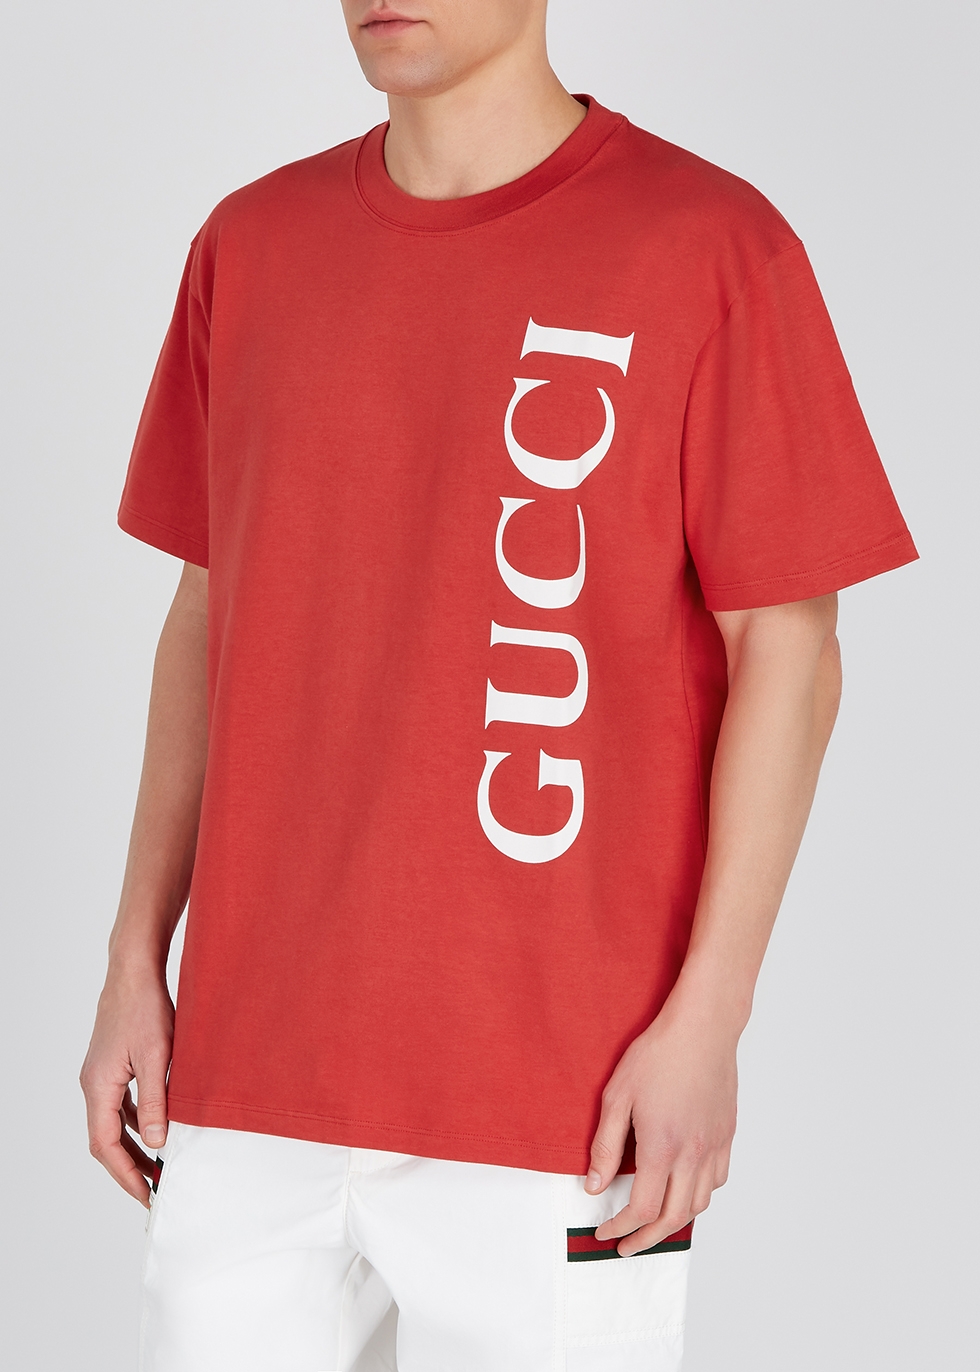 gucci red and white shirt